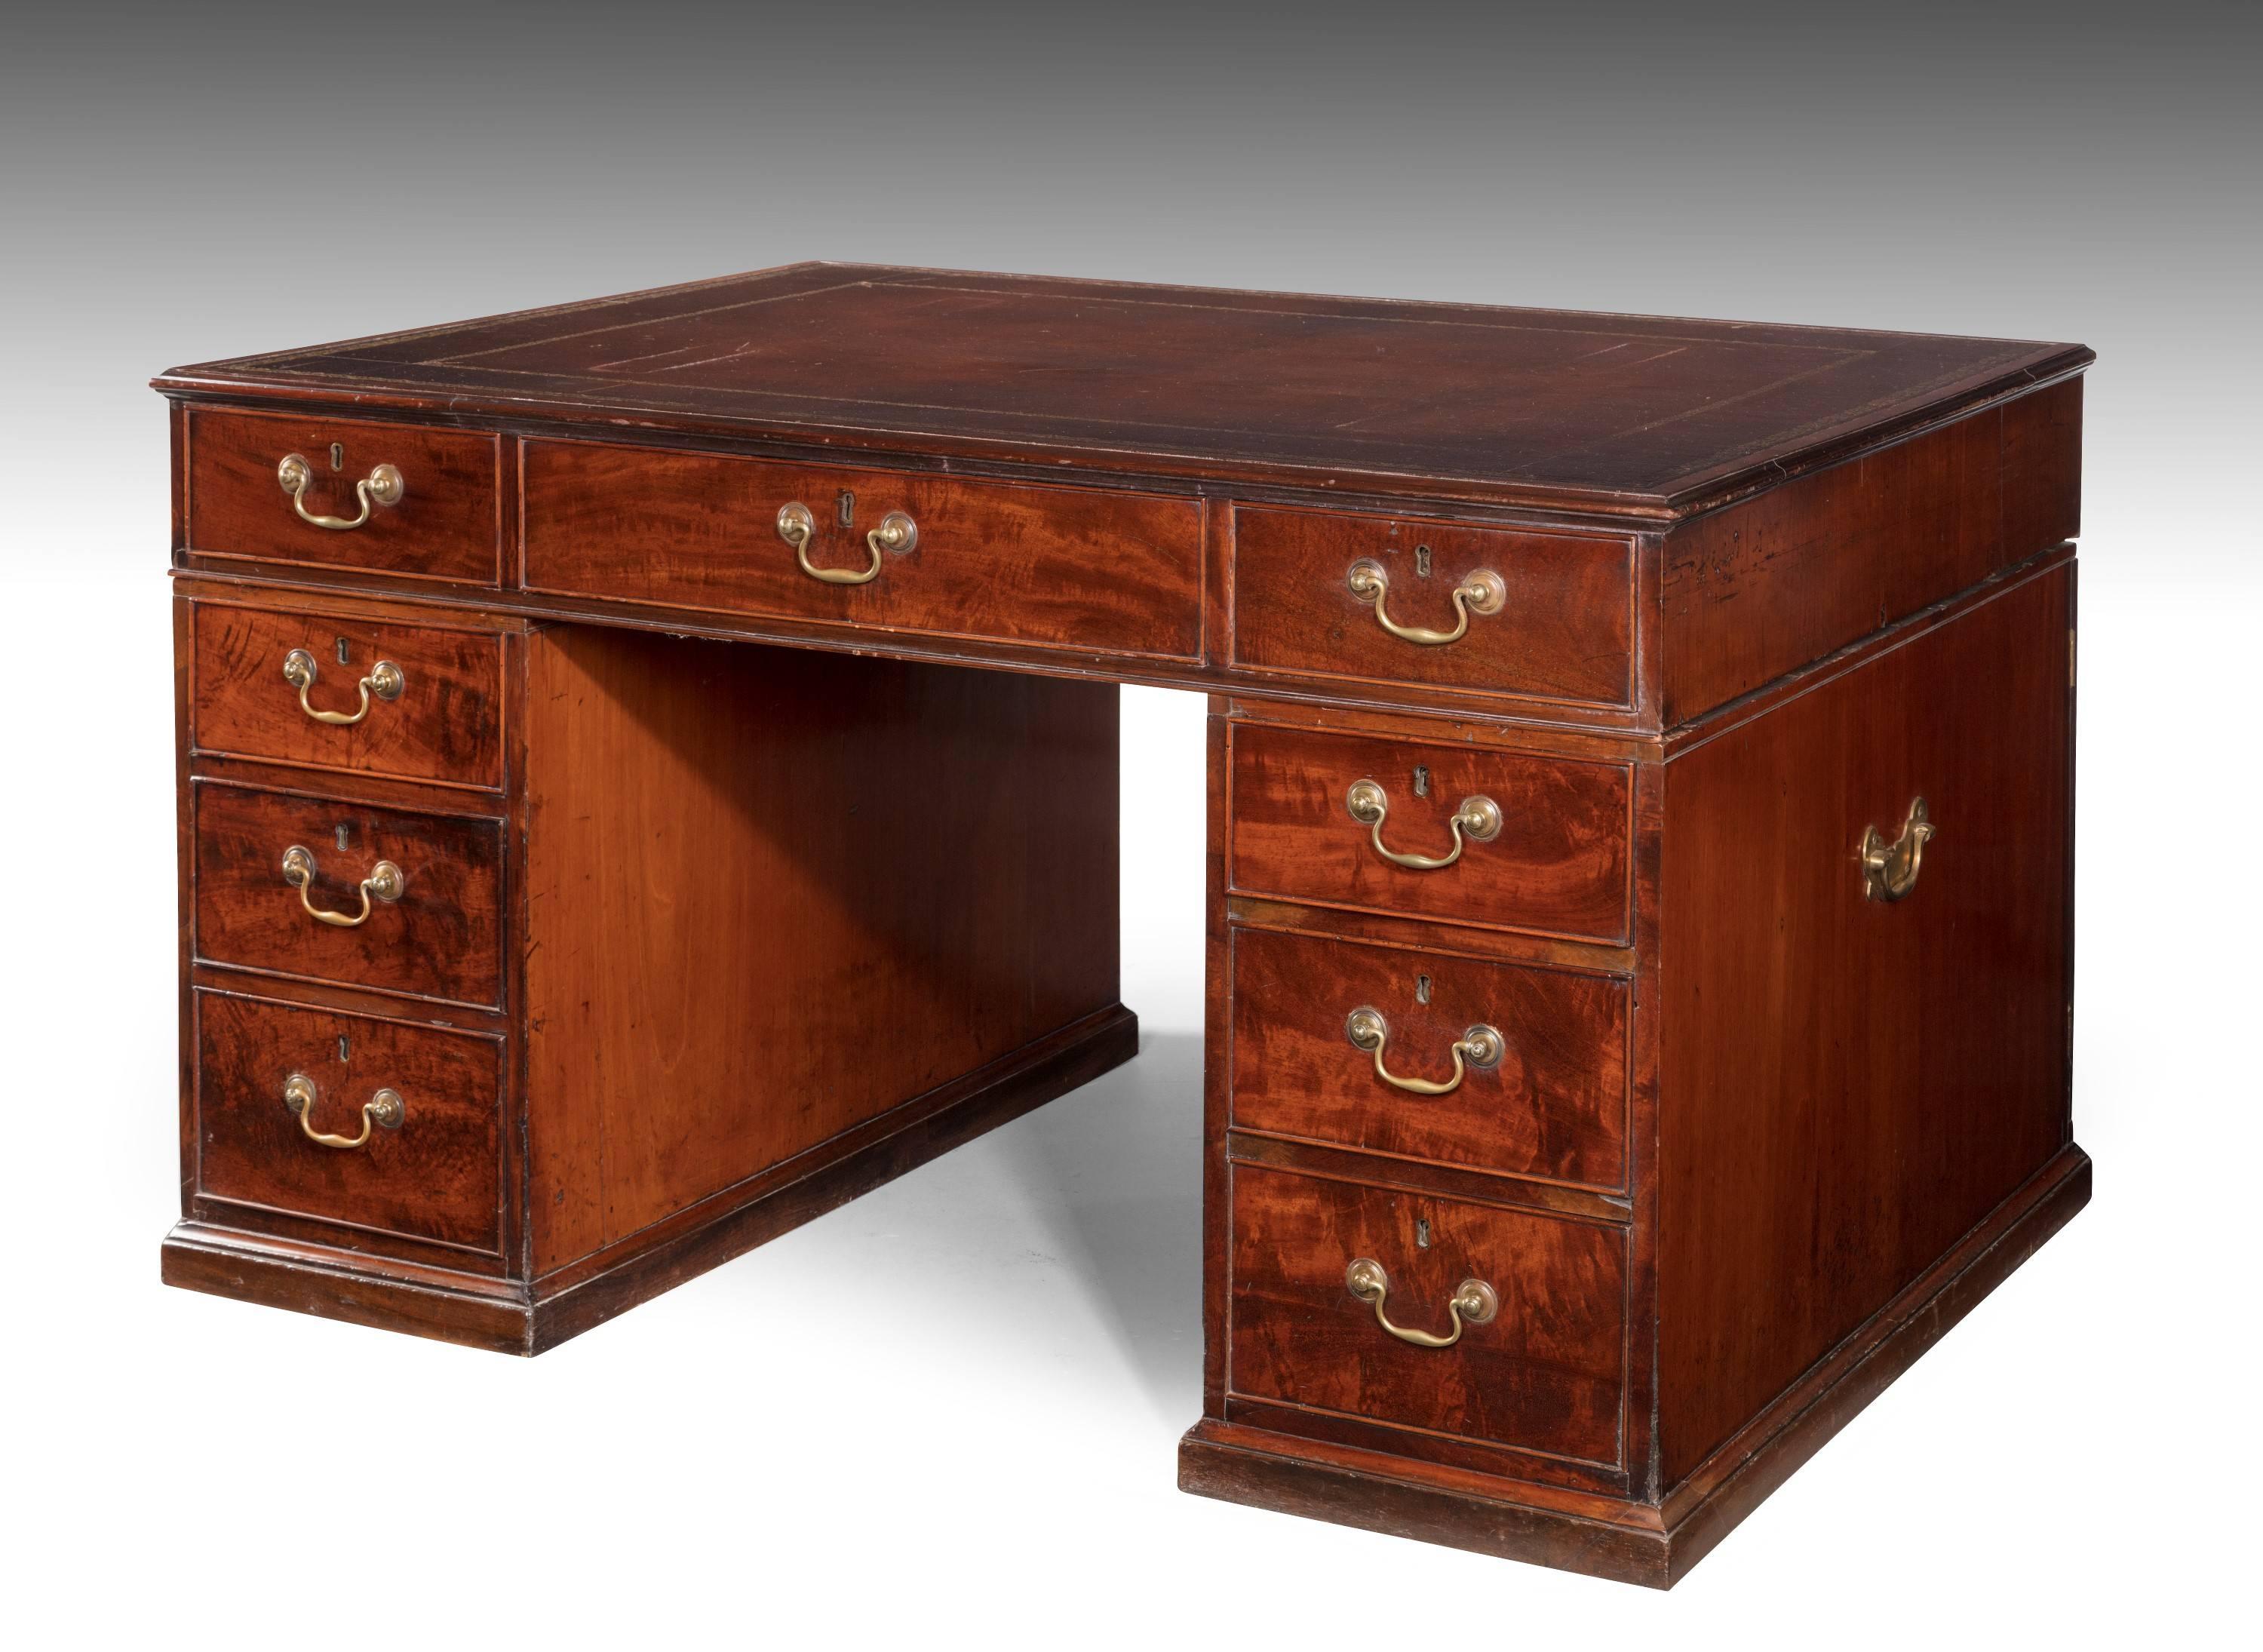 A very good George III period mahogany library desk of restrained form. One side with nine drawers the reverse with pedestal cupboards and three drawers to the top section. The best design of its type.